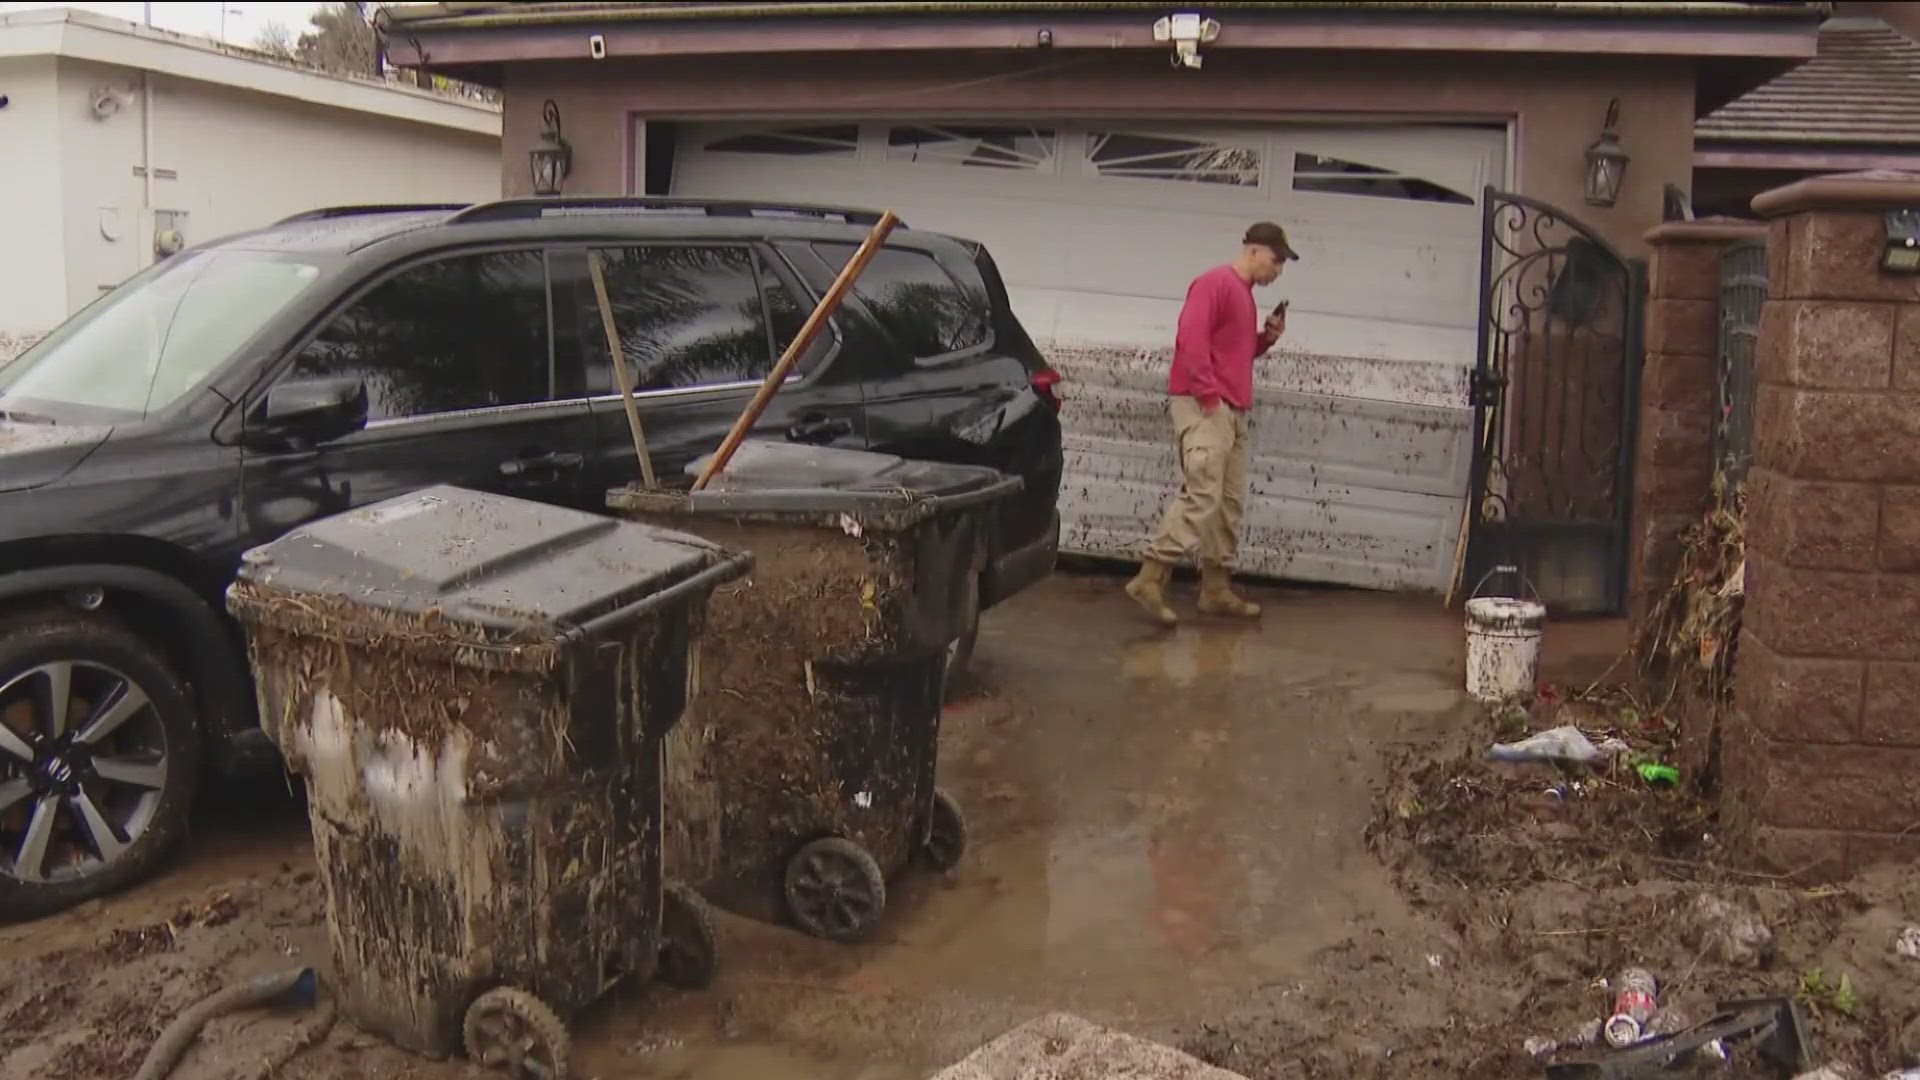 Many people took the day off work to shovel mud and clean up. Some residents unleashed anger at the City of San Diego for the damage.